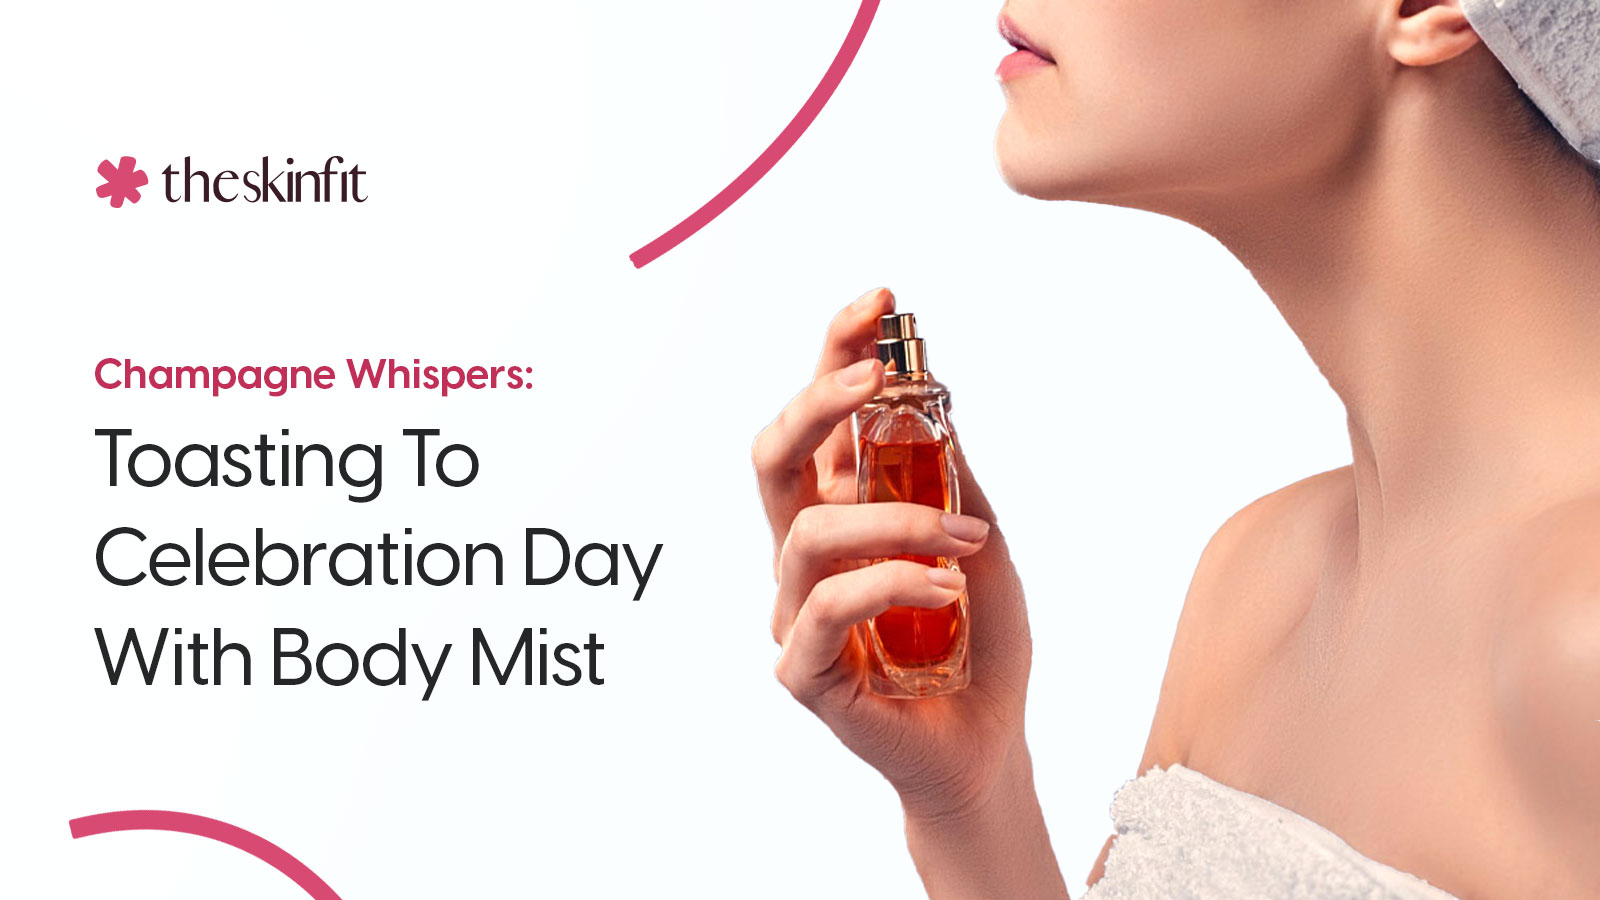 Champagne Whispers: Toasting To Celebration Day With Body Mist